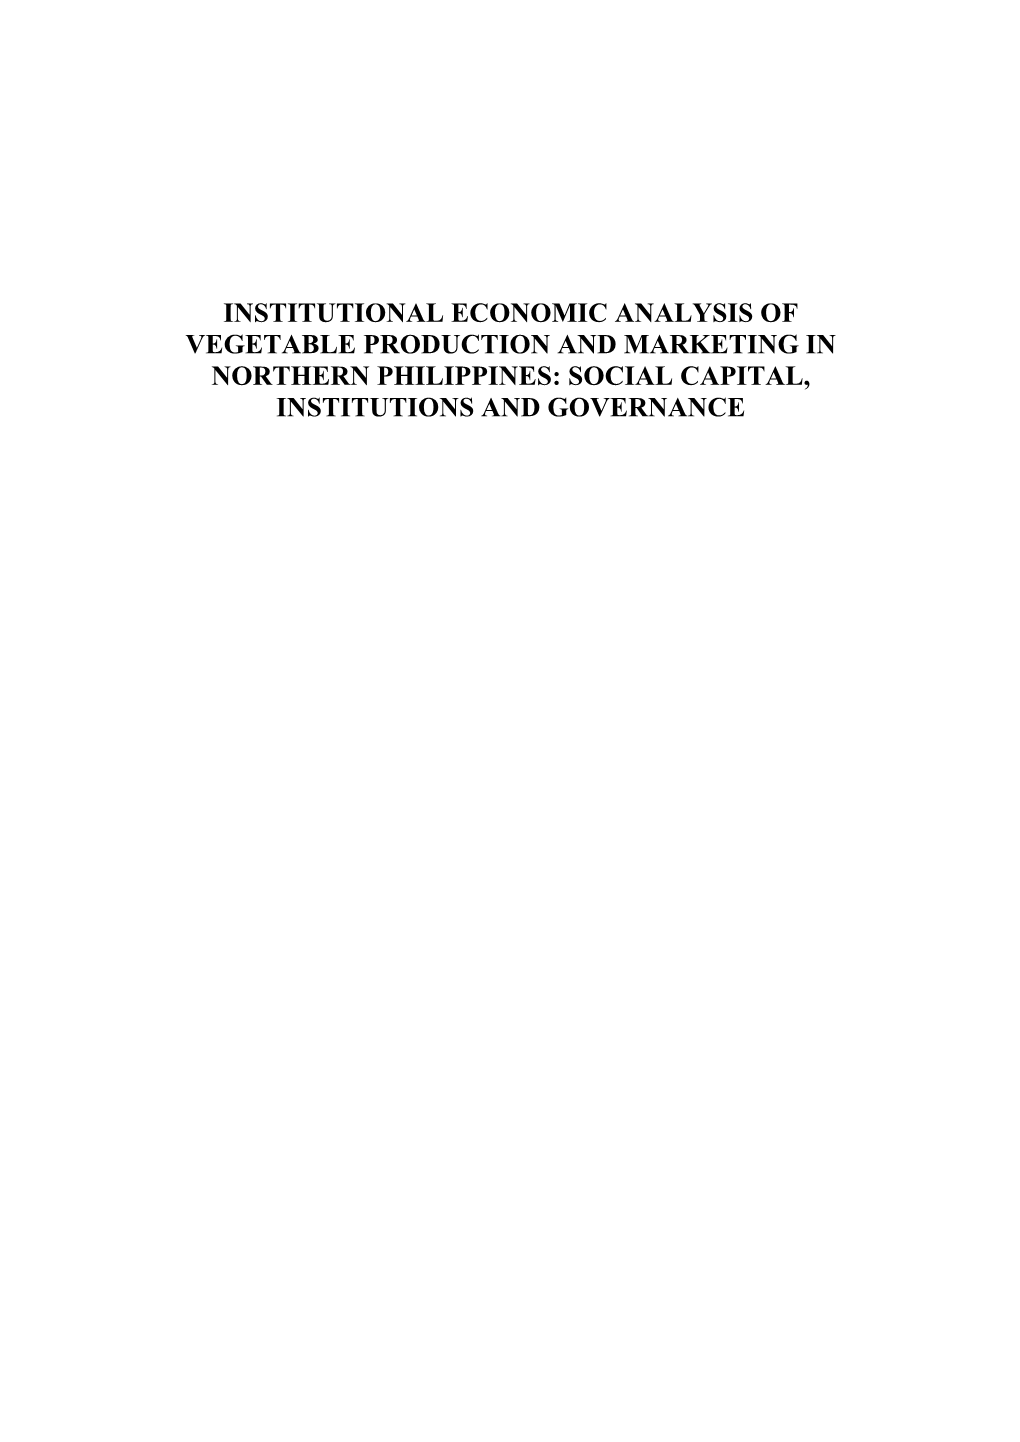 Institutional Economic Analysis of Vegetable Production and Marketing in Northern Philippines: Social Capital, Institutions and Governance